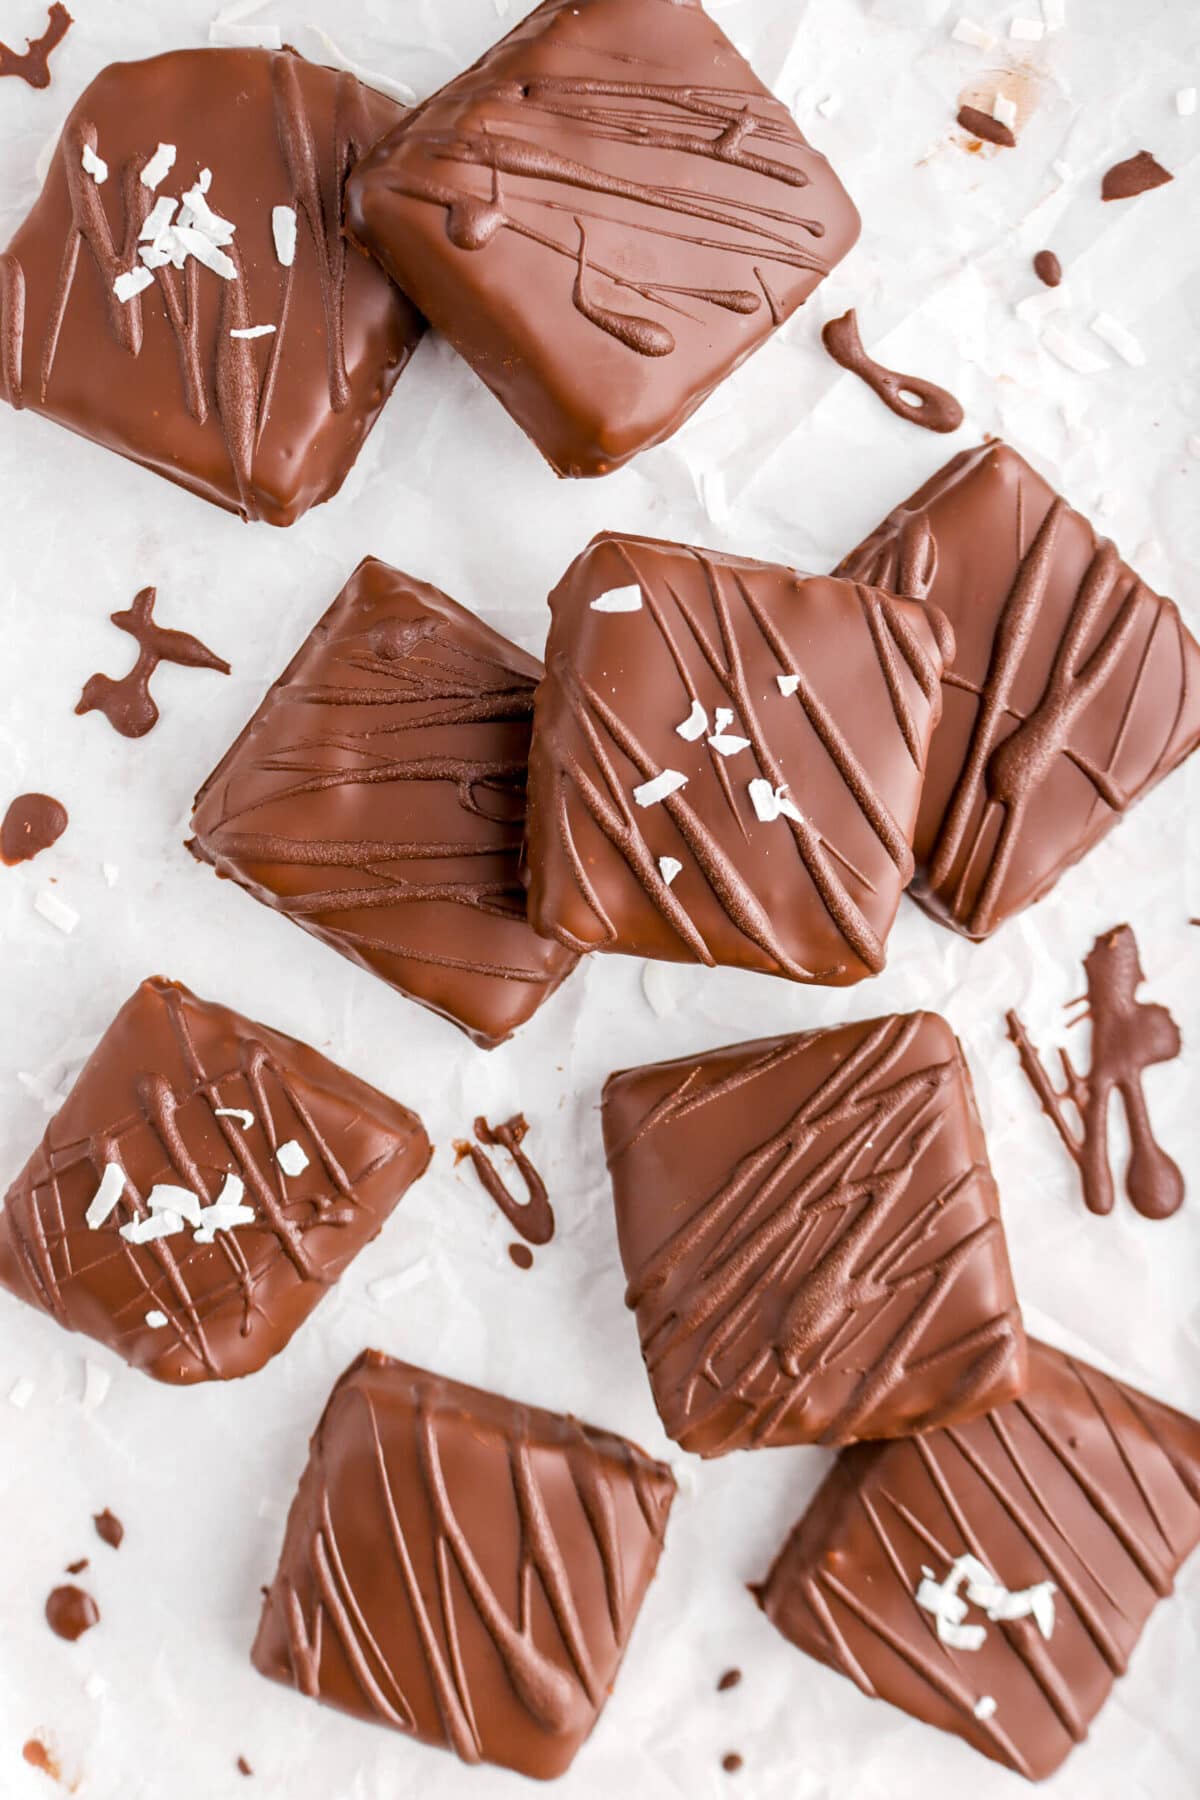 nine square chocolates on crinkled parchment paper with coconut flakes on four of them